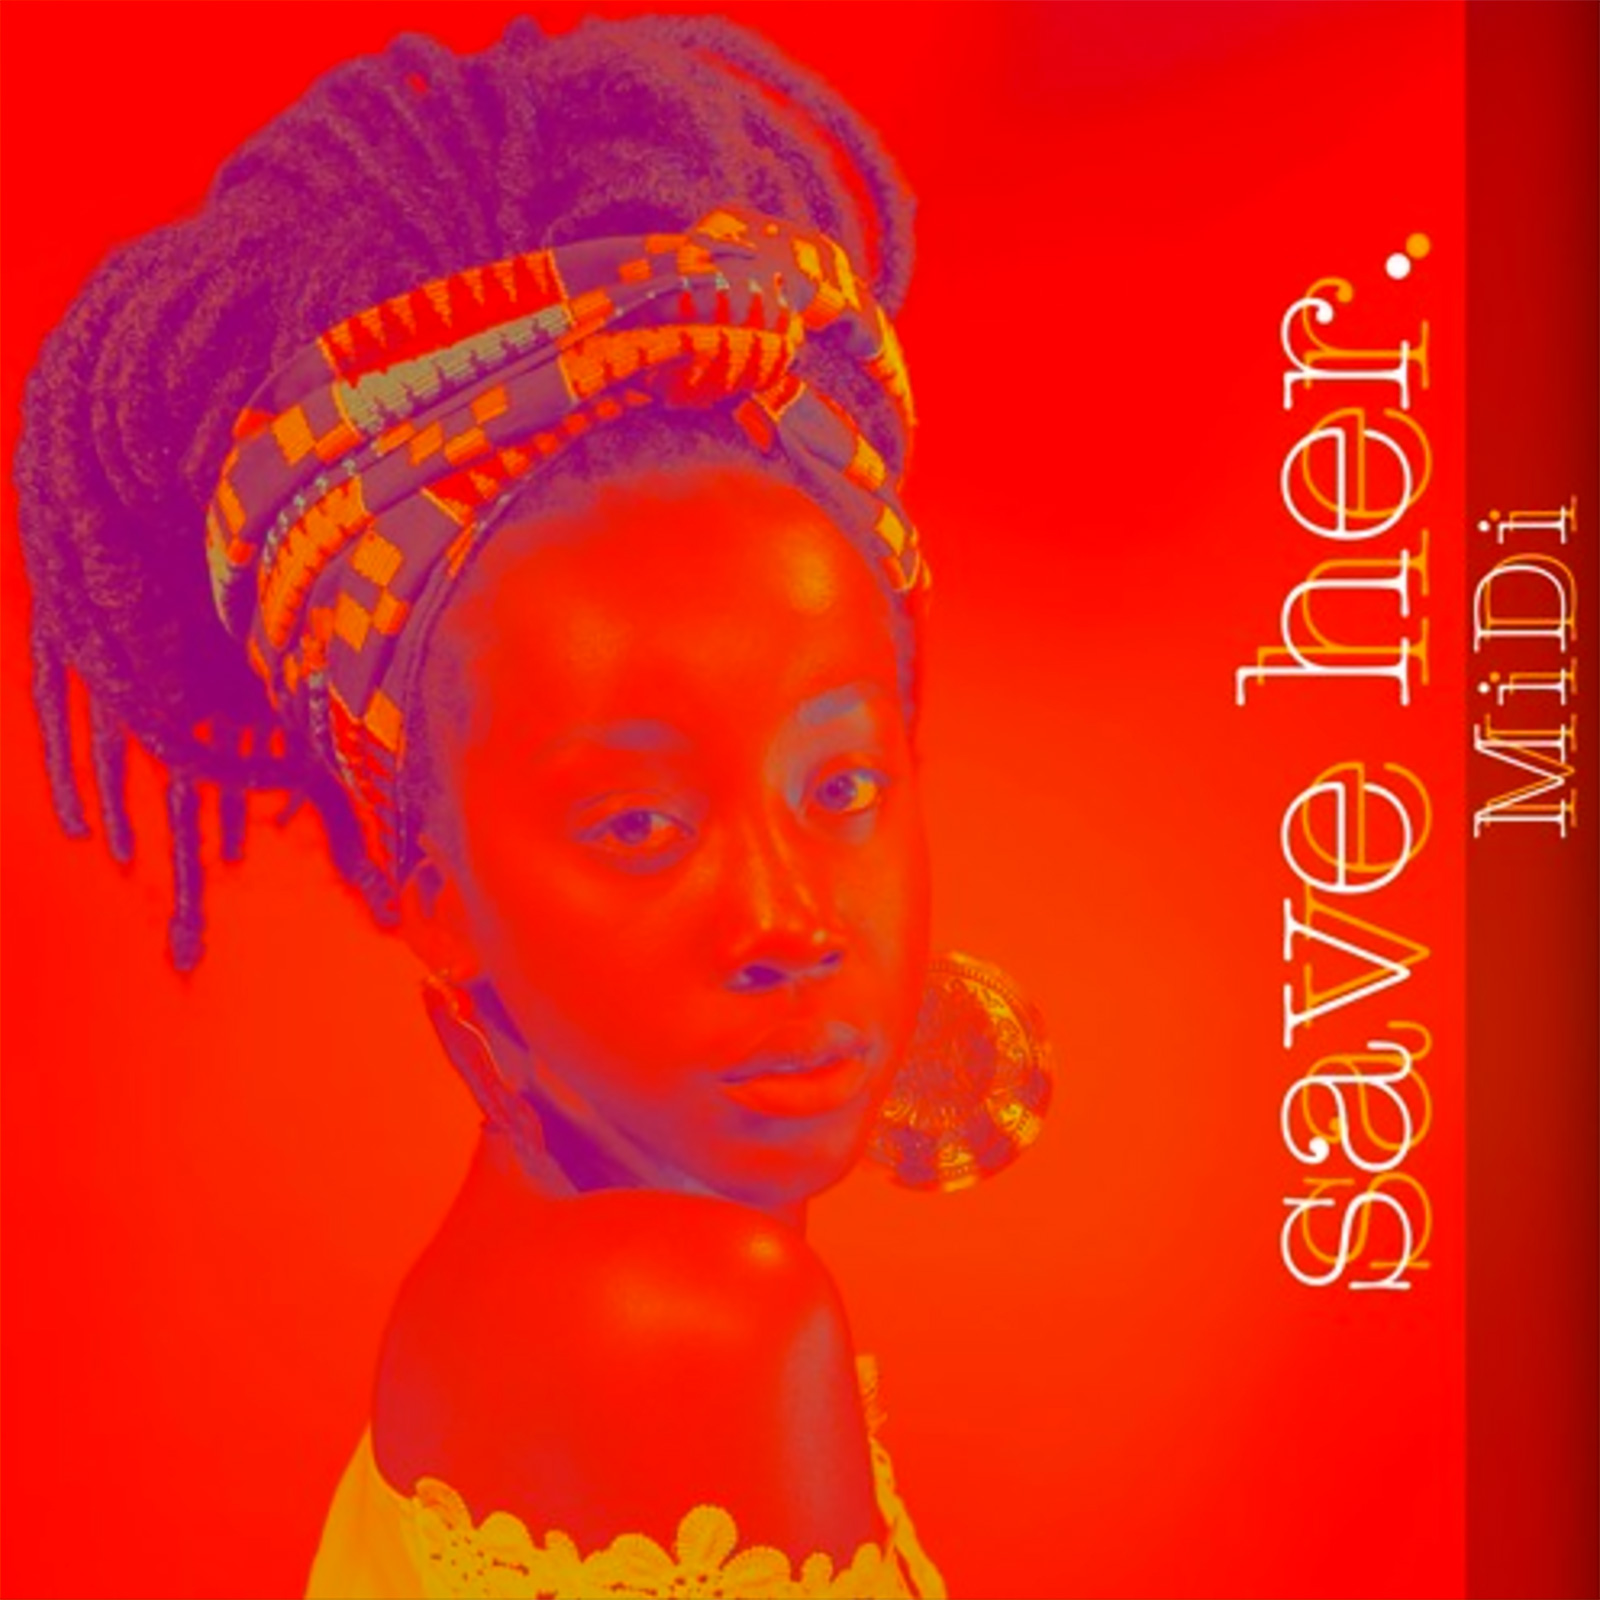 Save Her by MiDi